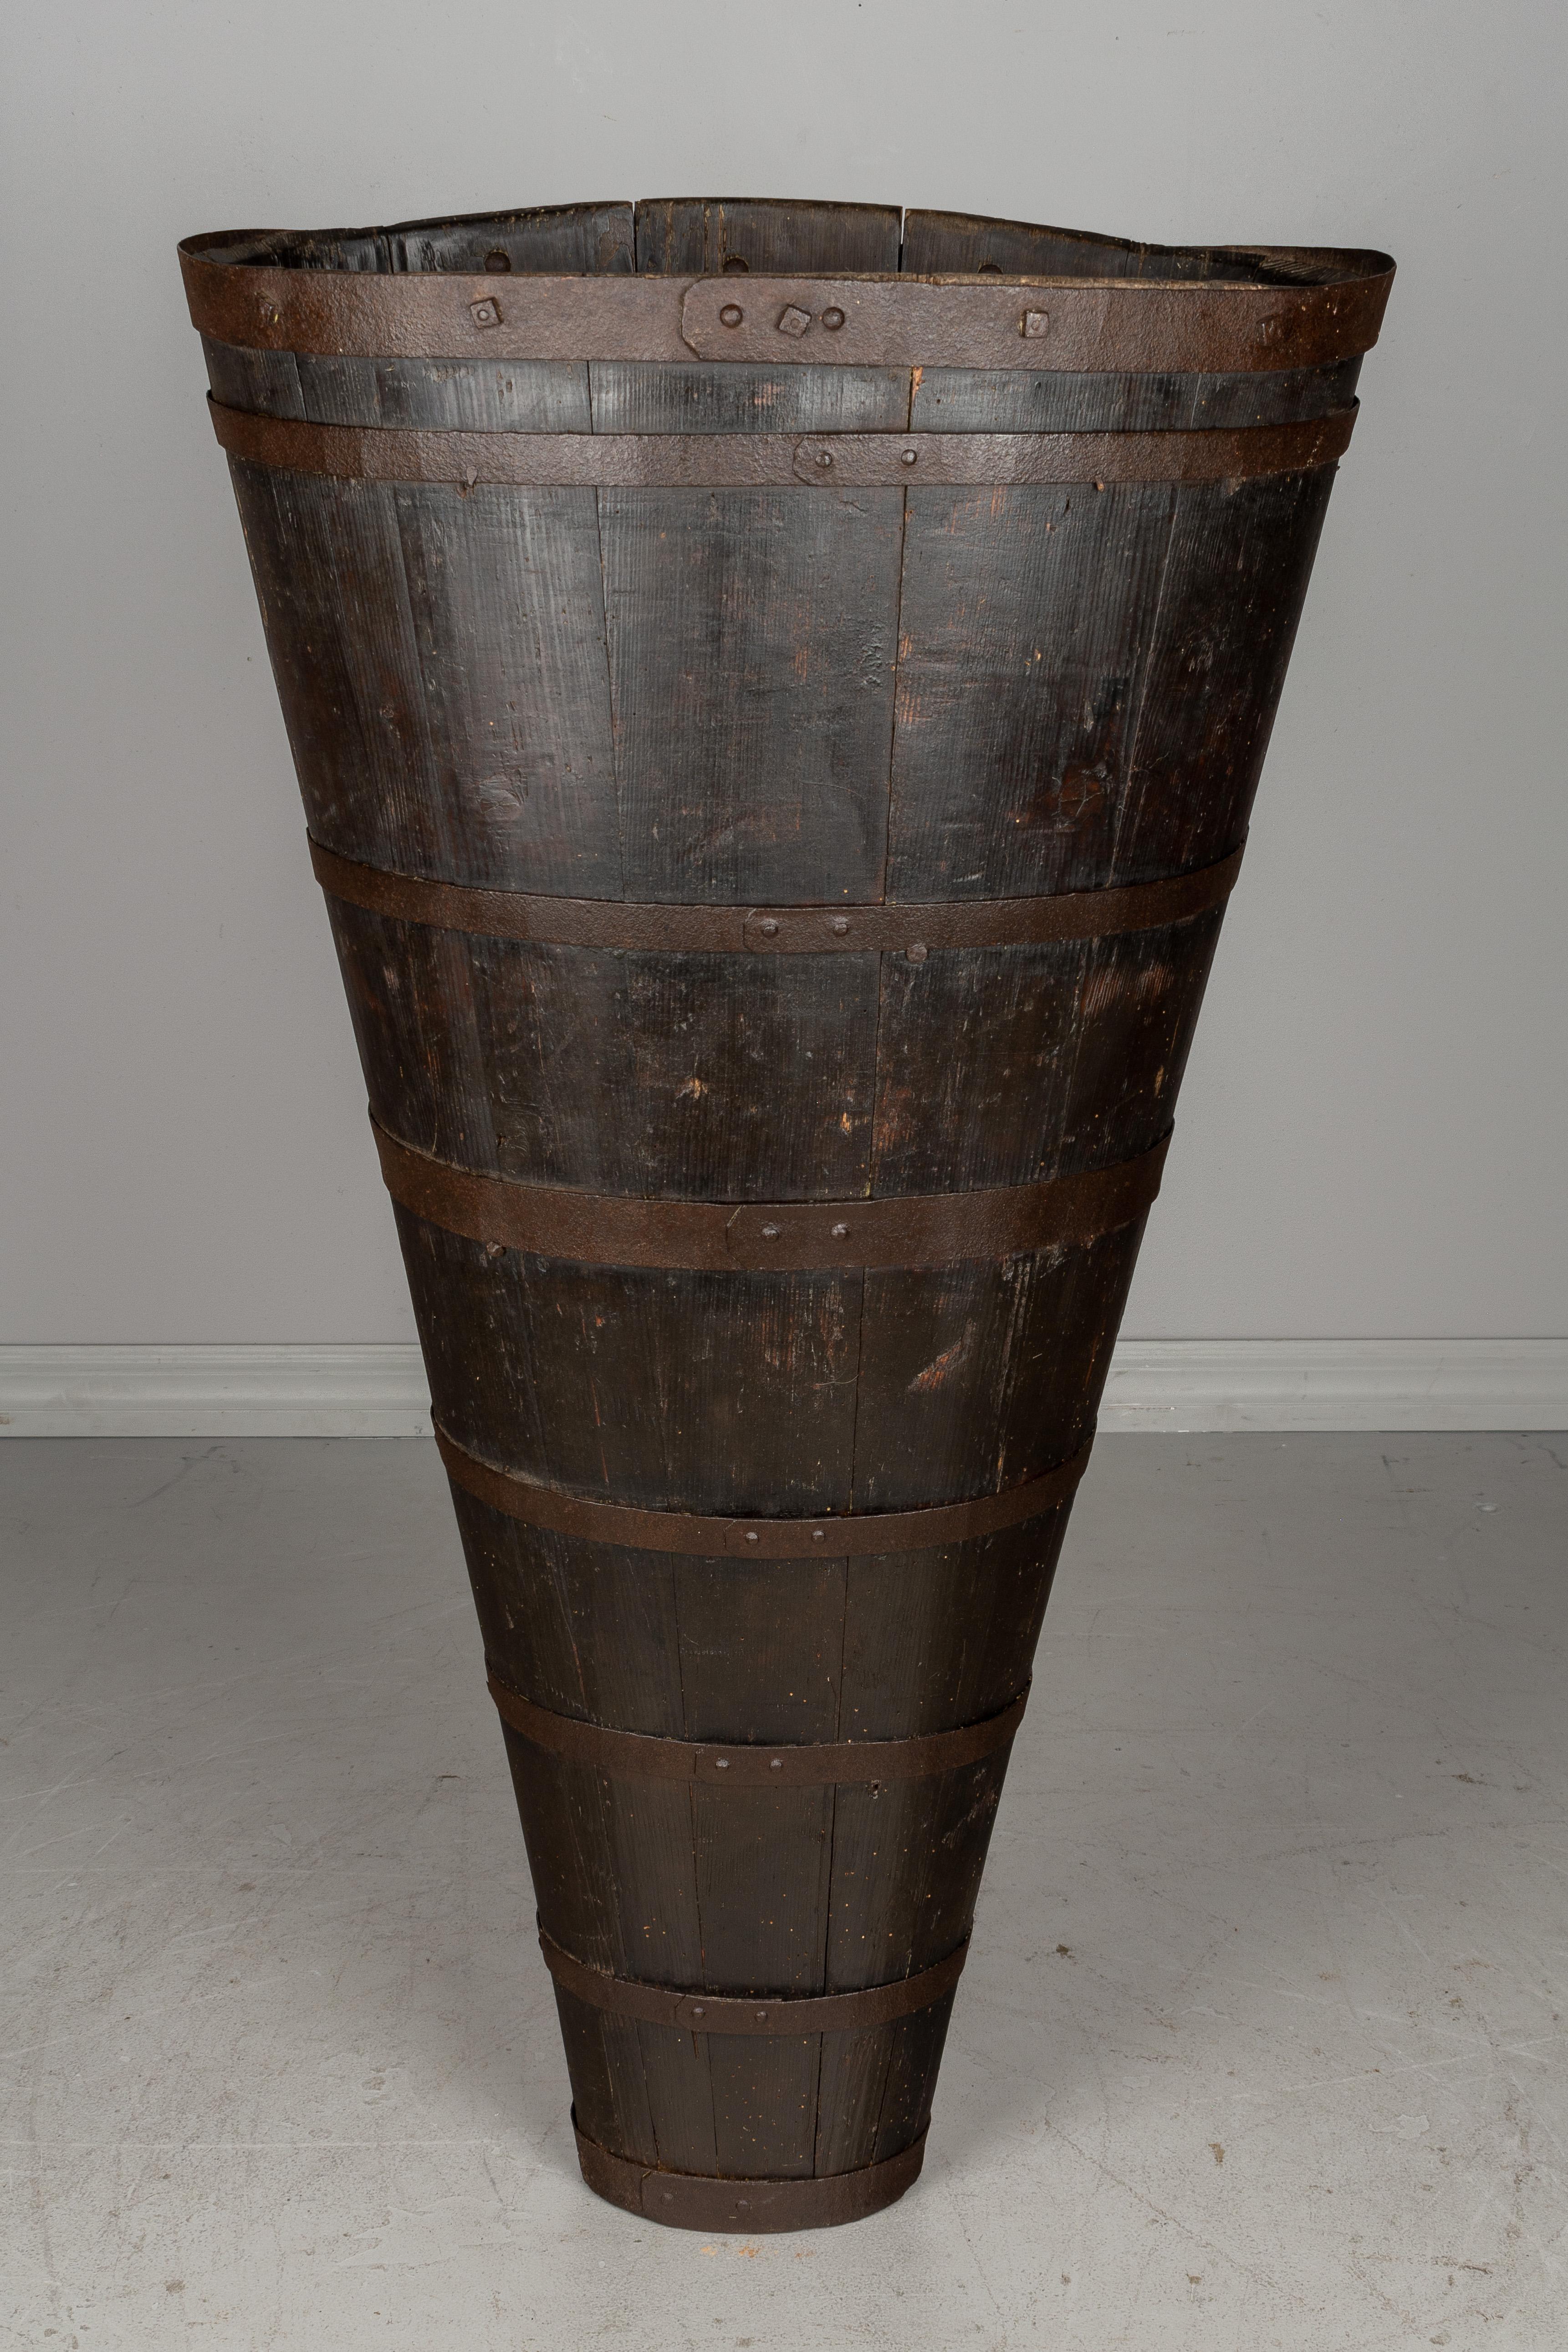 A French hotte de vigneron, or grape harvesting barrel. Used in the vineyard, this barrel was strapped to the back and used to collect and transport the grapes. Made of pine with iron binding and cast iron loops where the straps were tied. Beautiful